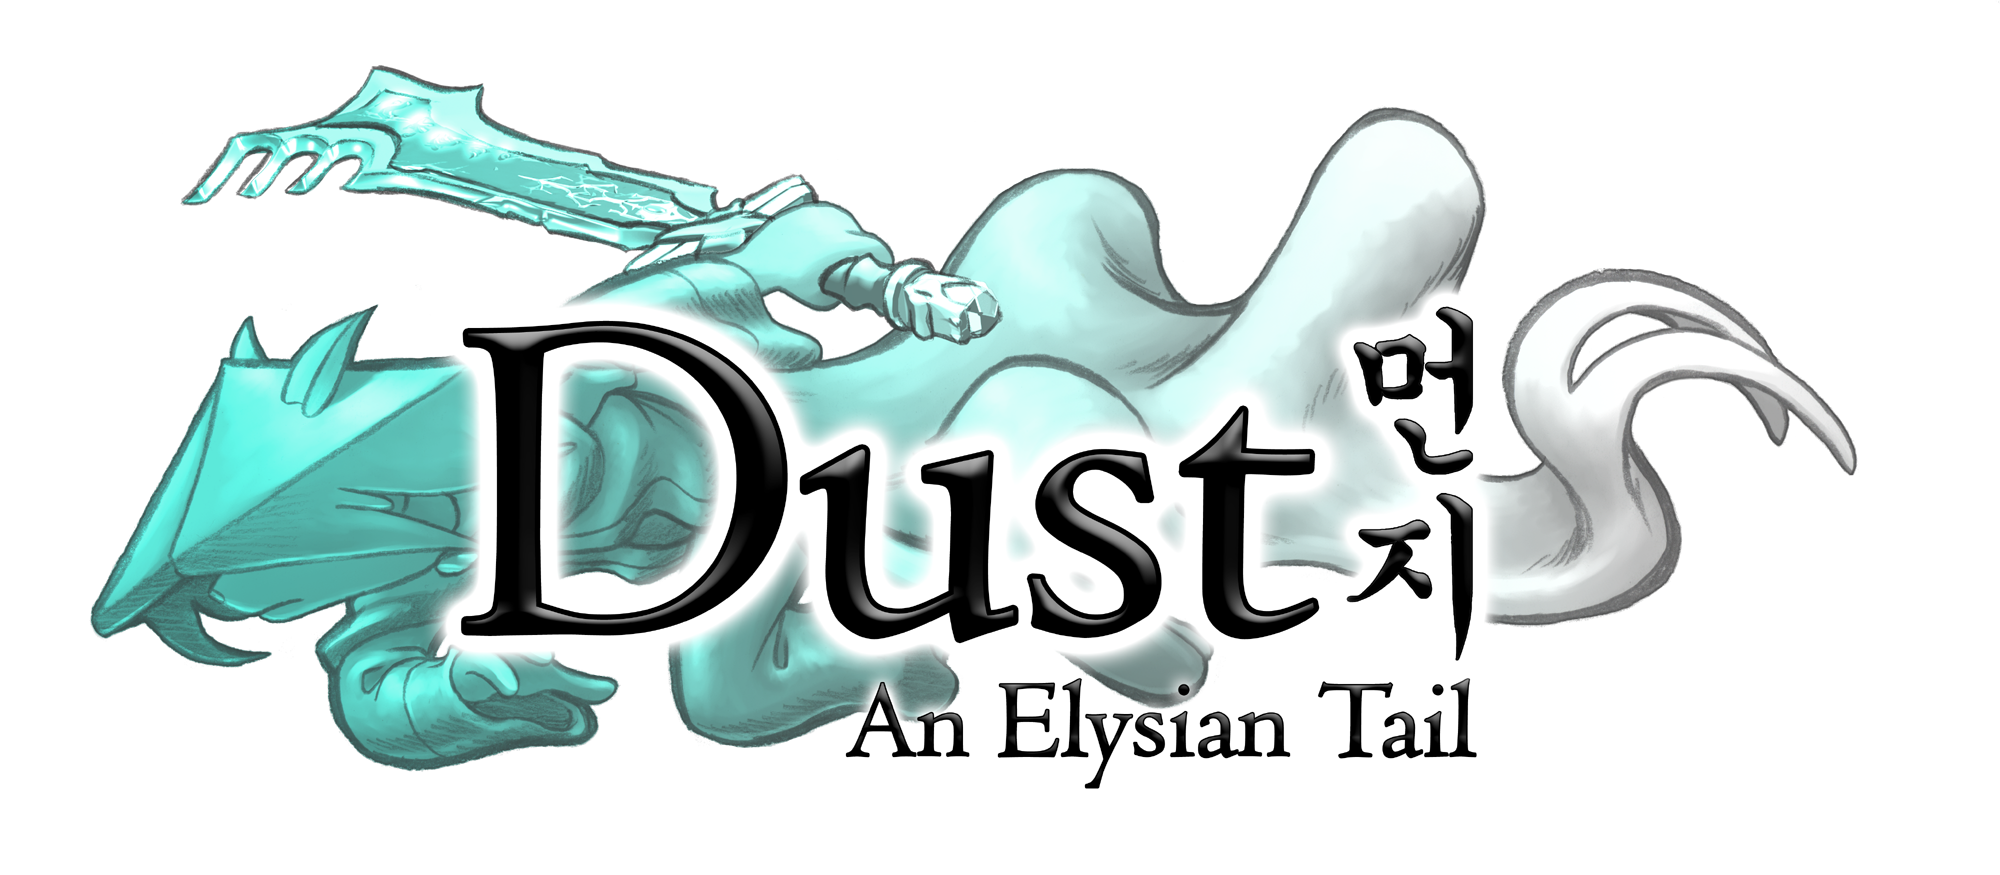 Dust: An Elysian Tail Backgrounds, Compatible - PC, Mobile, Gadgets| 2000x875 px